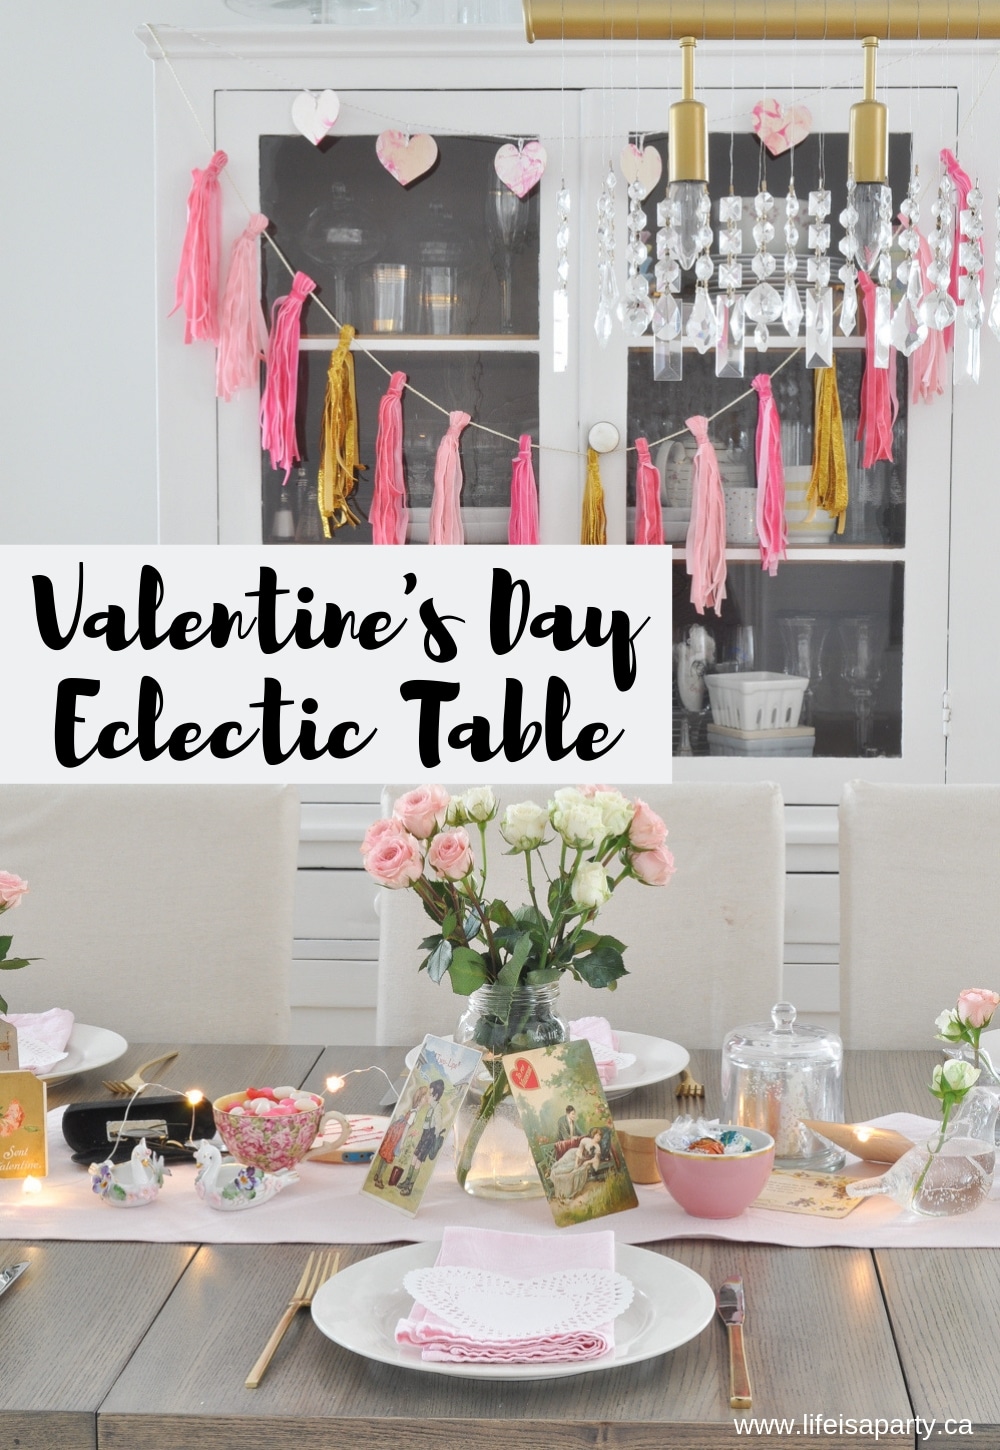 Valentine's Day Eclectic Table -Valentine's Day Table inspired by antique post cards and collected romantic treasures. Perfect for Galentine's Day.